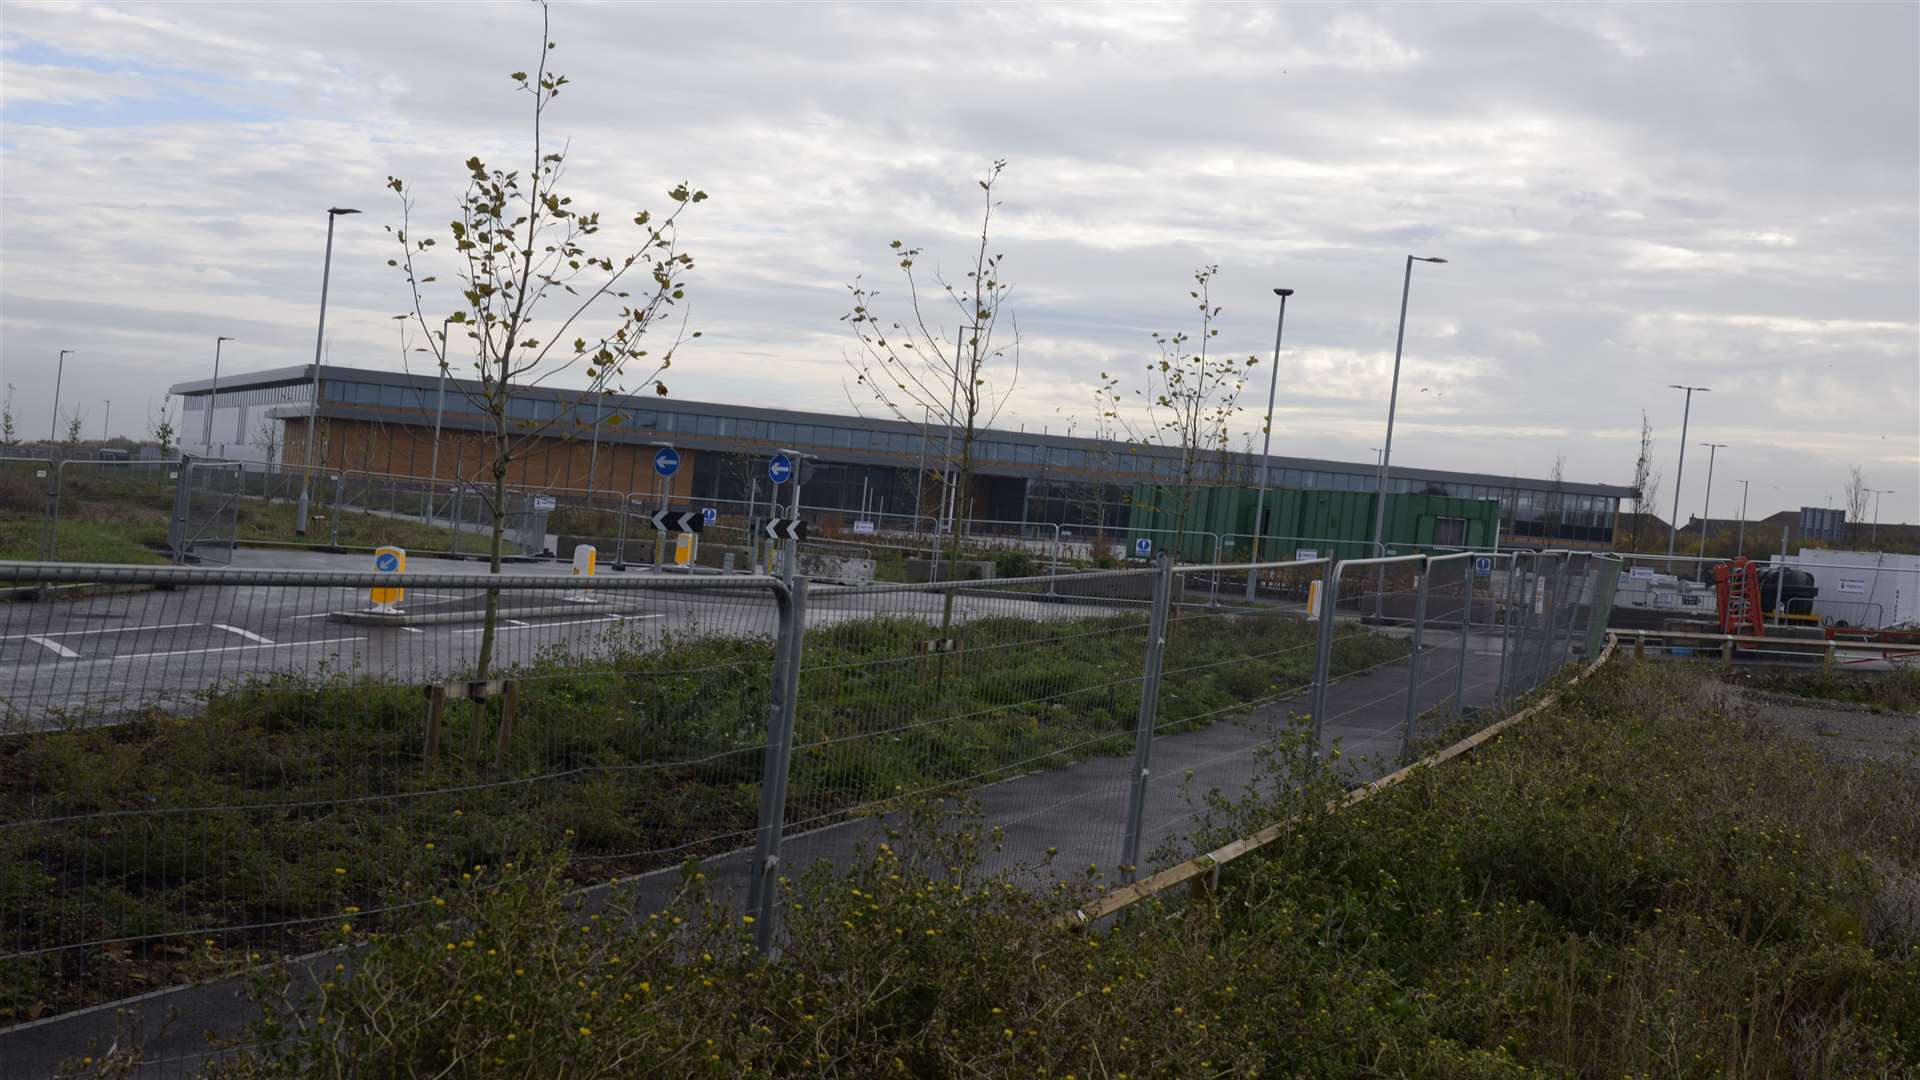 The mothballed Sainsbury's site. Picture: Chris Davey